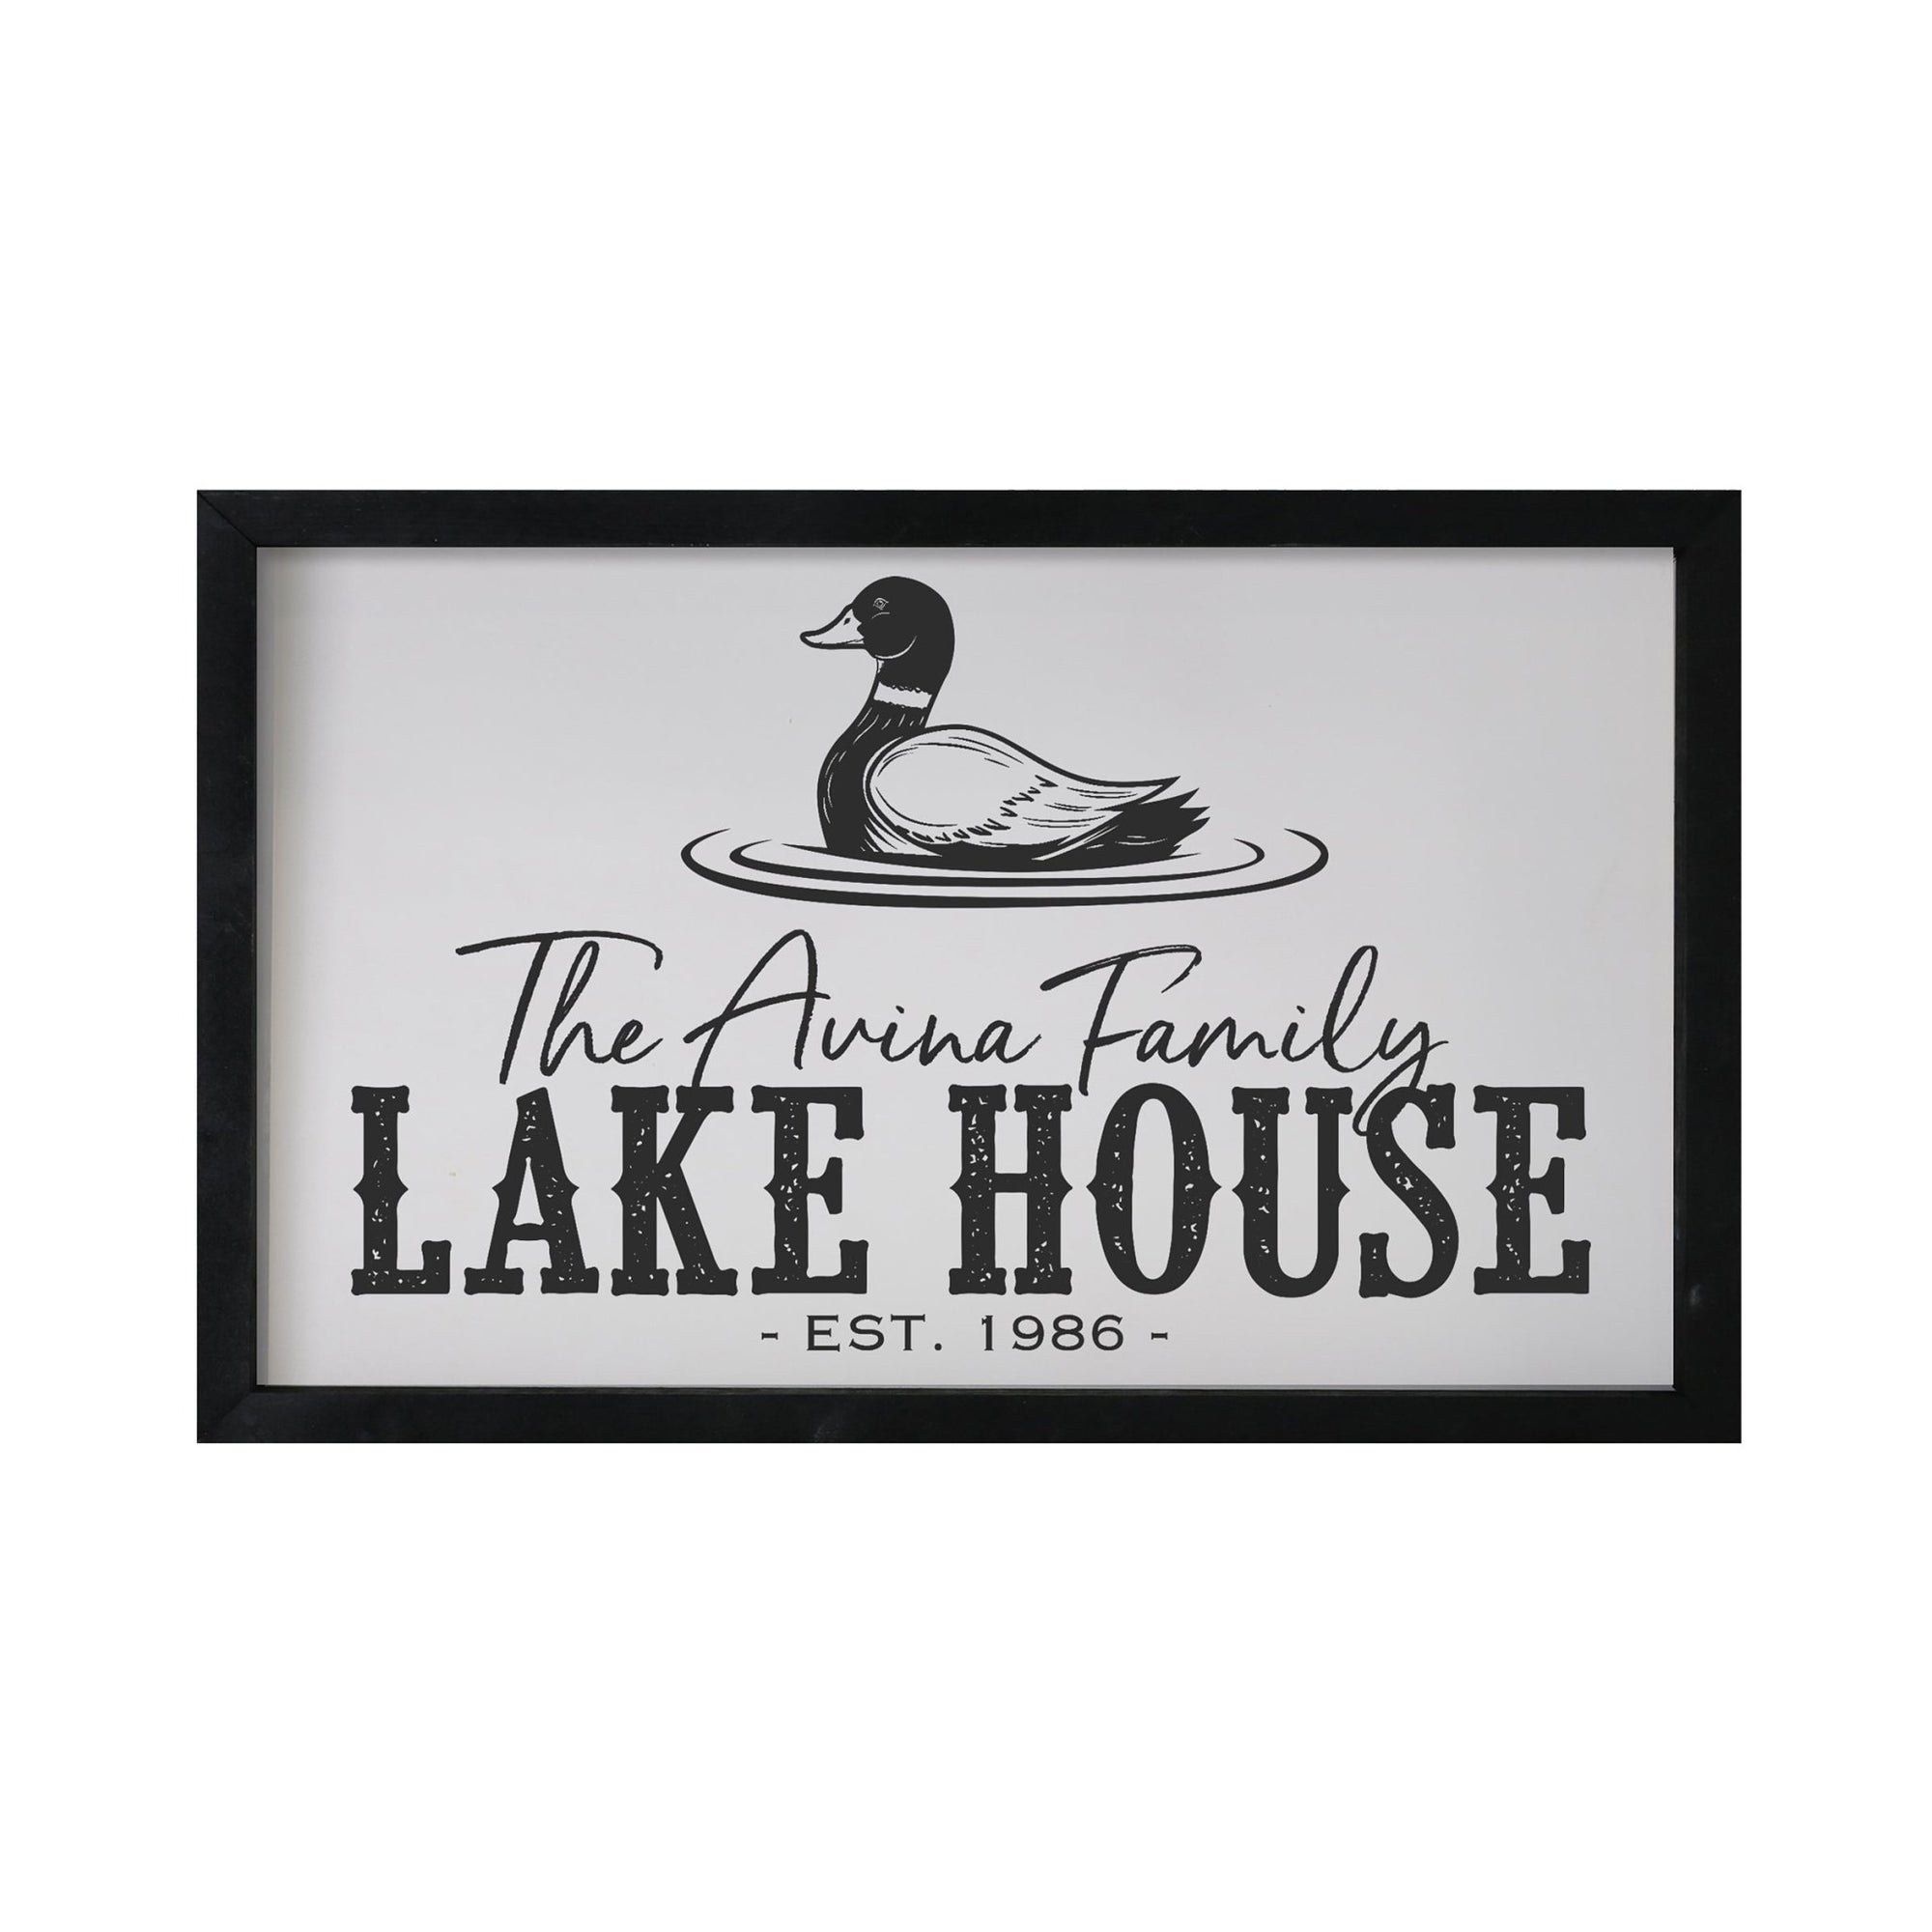 Inspirational Personalized Framed Shadow Box 12x18 - Lake House (Duck) - LifeSong Milestones